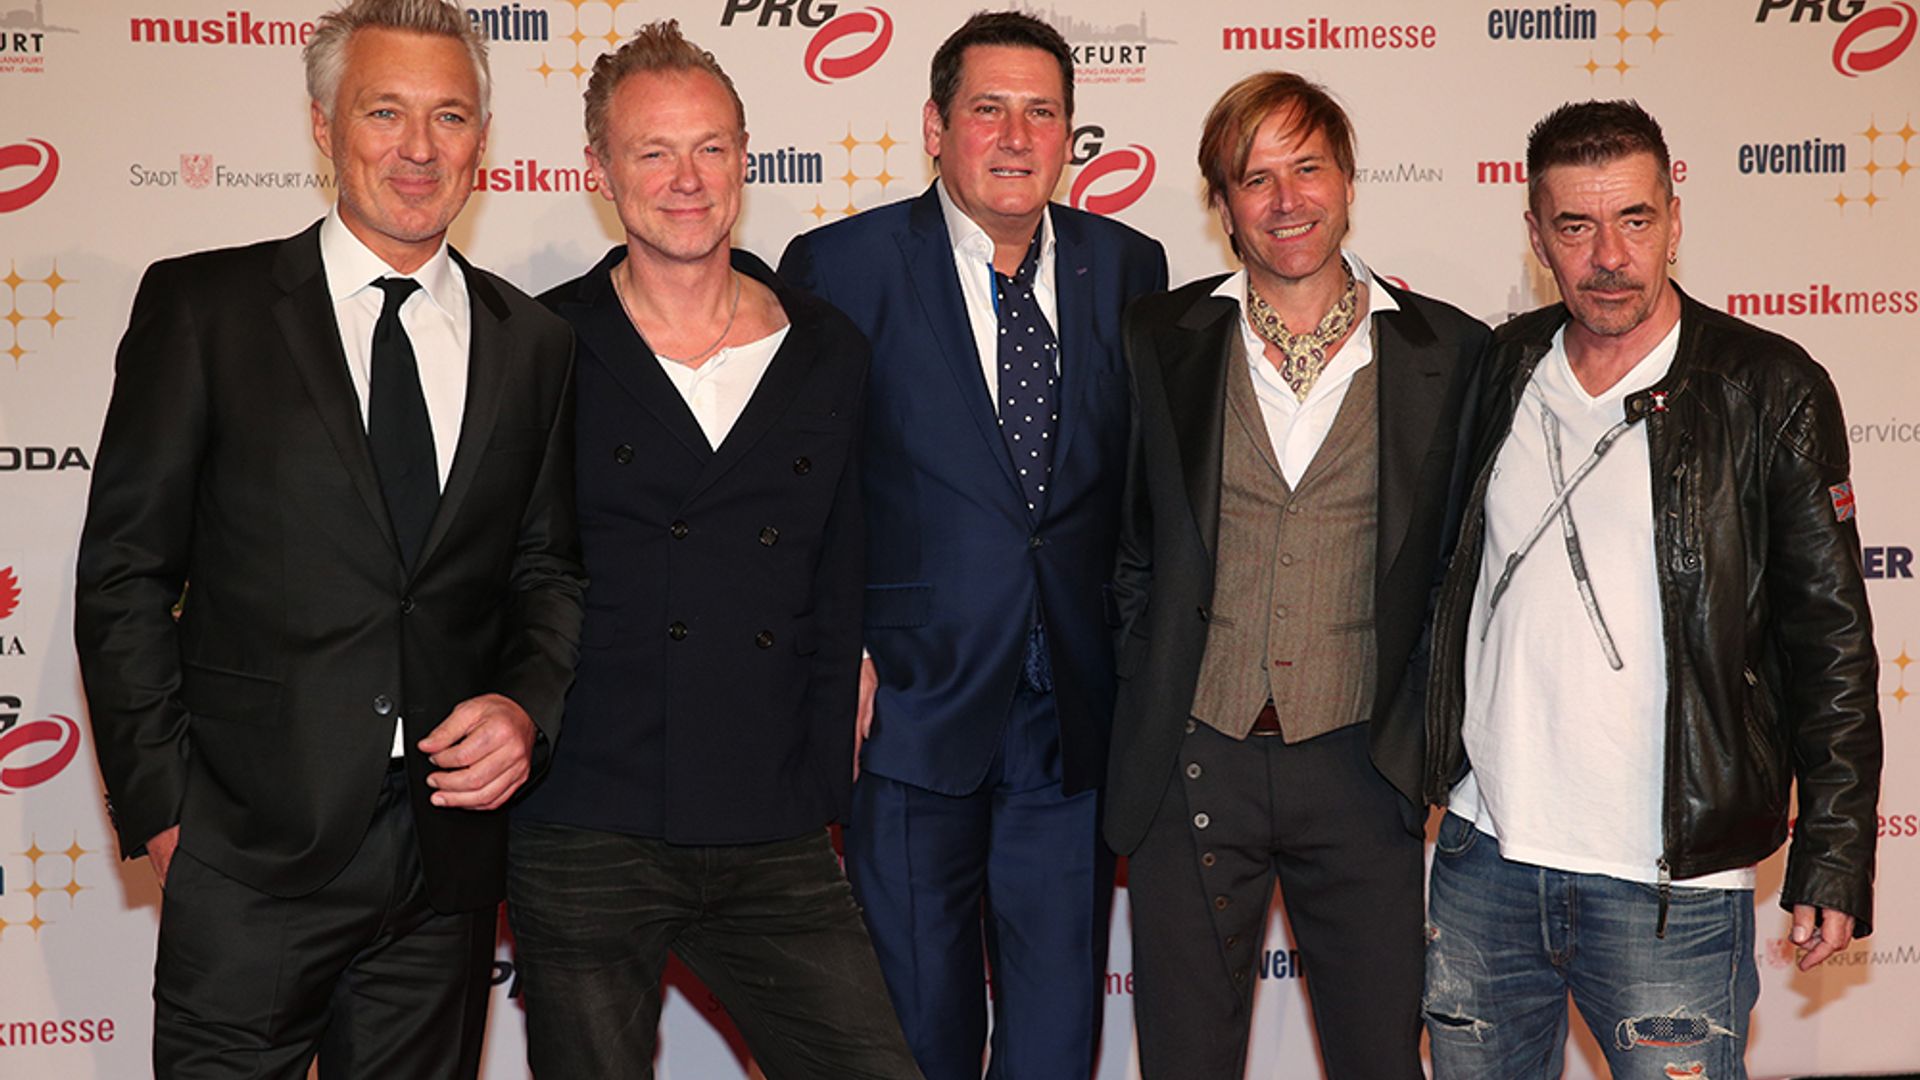 Spandau Ballet on the red carpet in 2015 